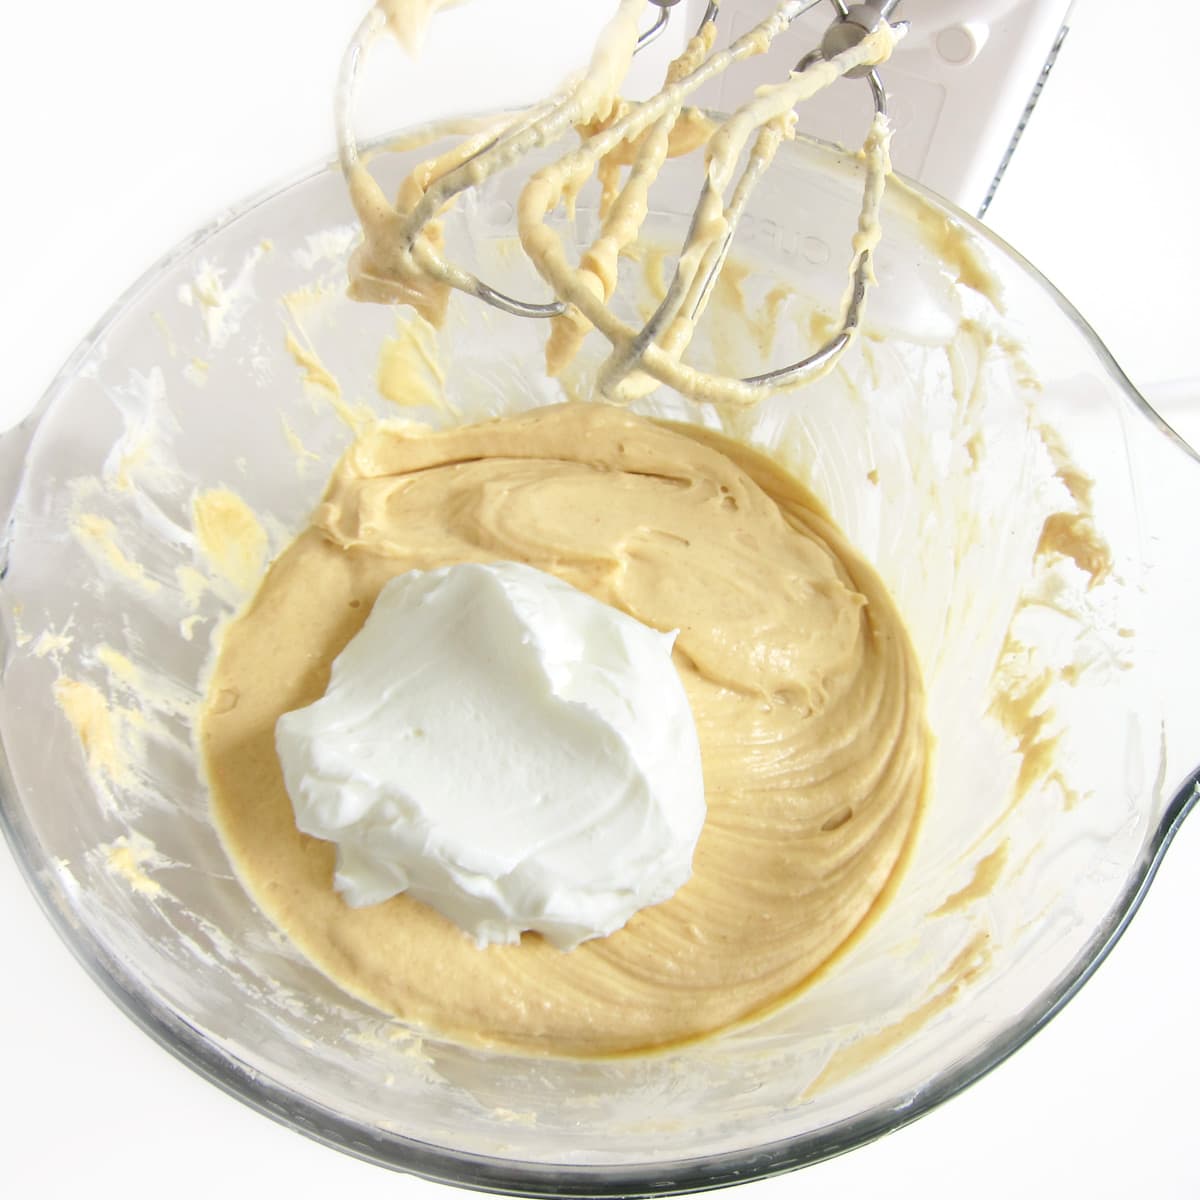 sour cream in bowl of peanut butter cheesecake filling